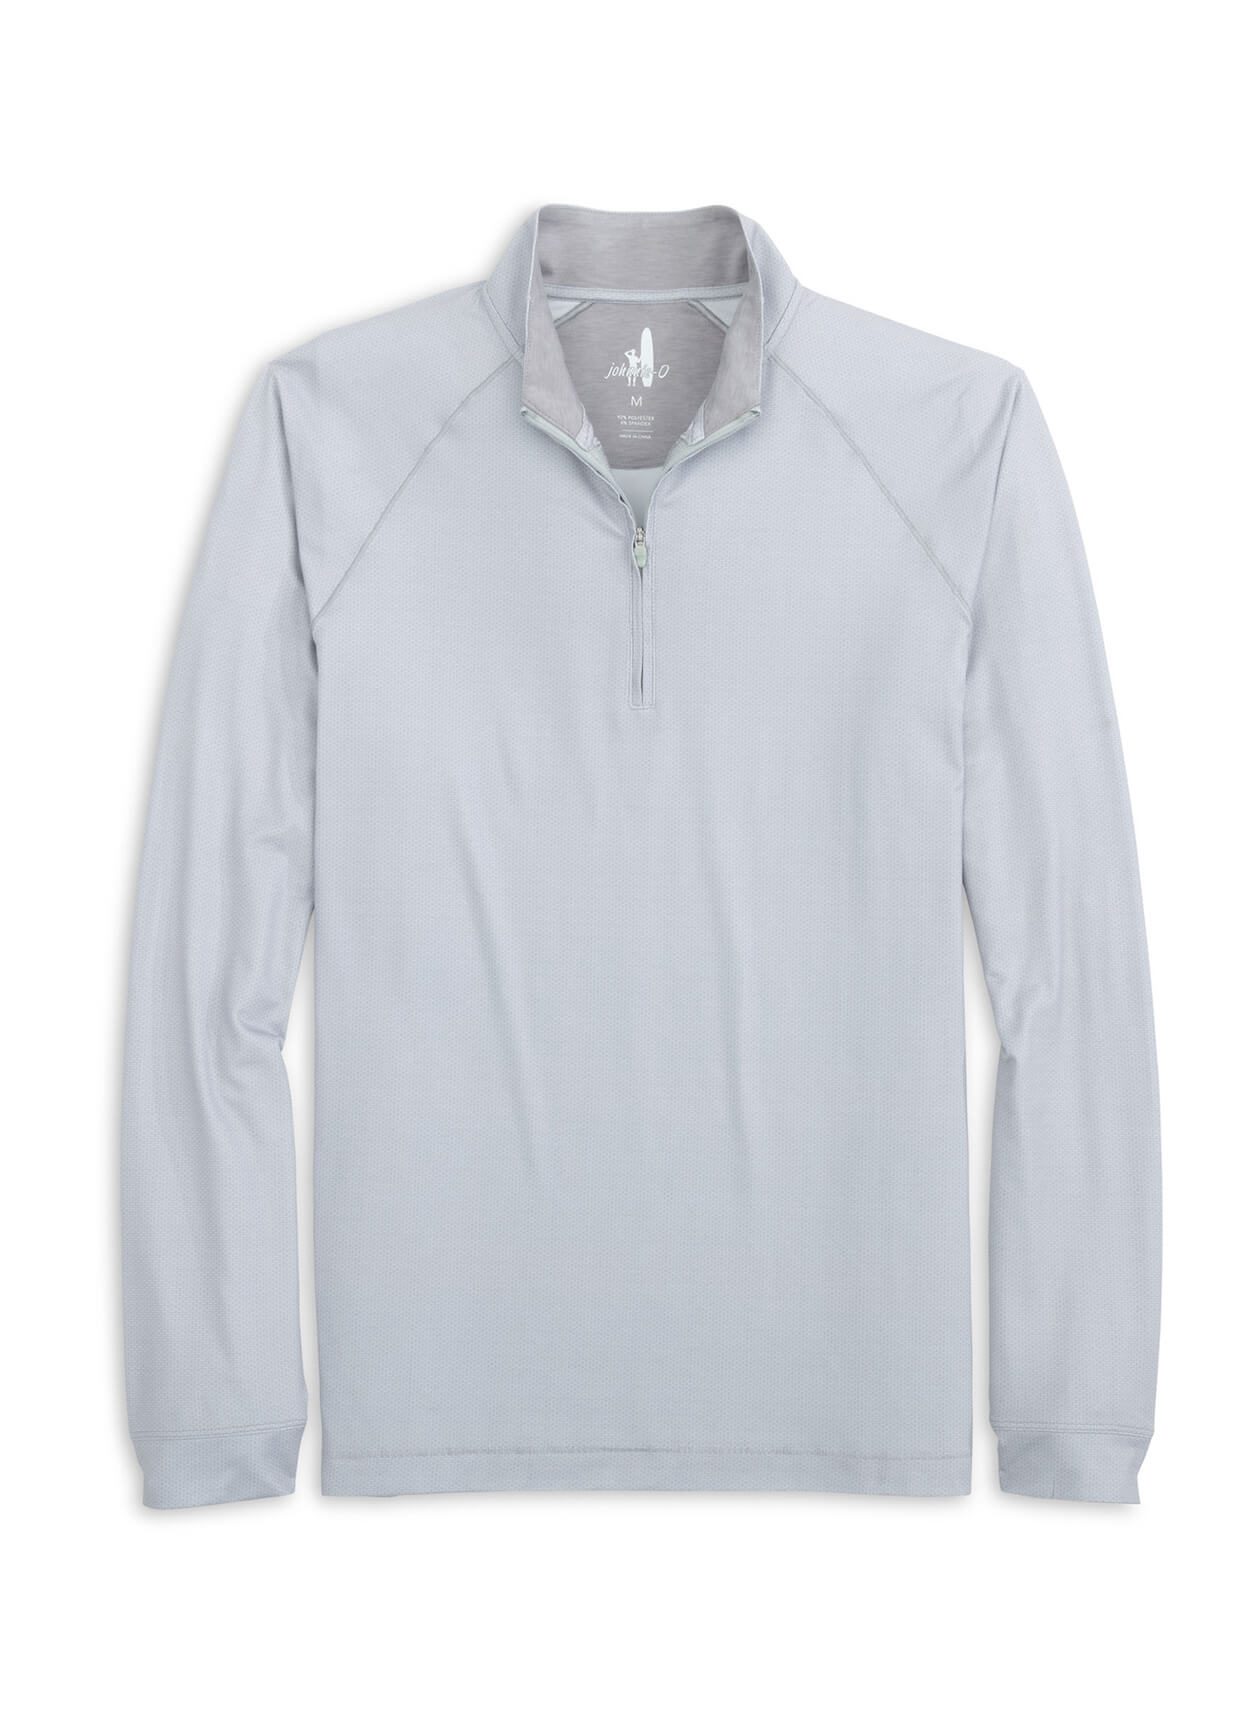 Johnnie-O Gainey Performance 1/4 Zip Pullover - 2 Colors